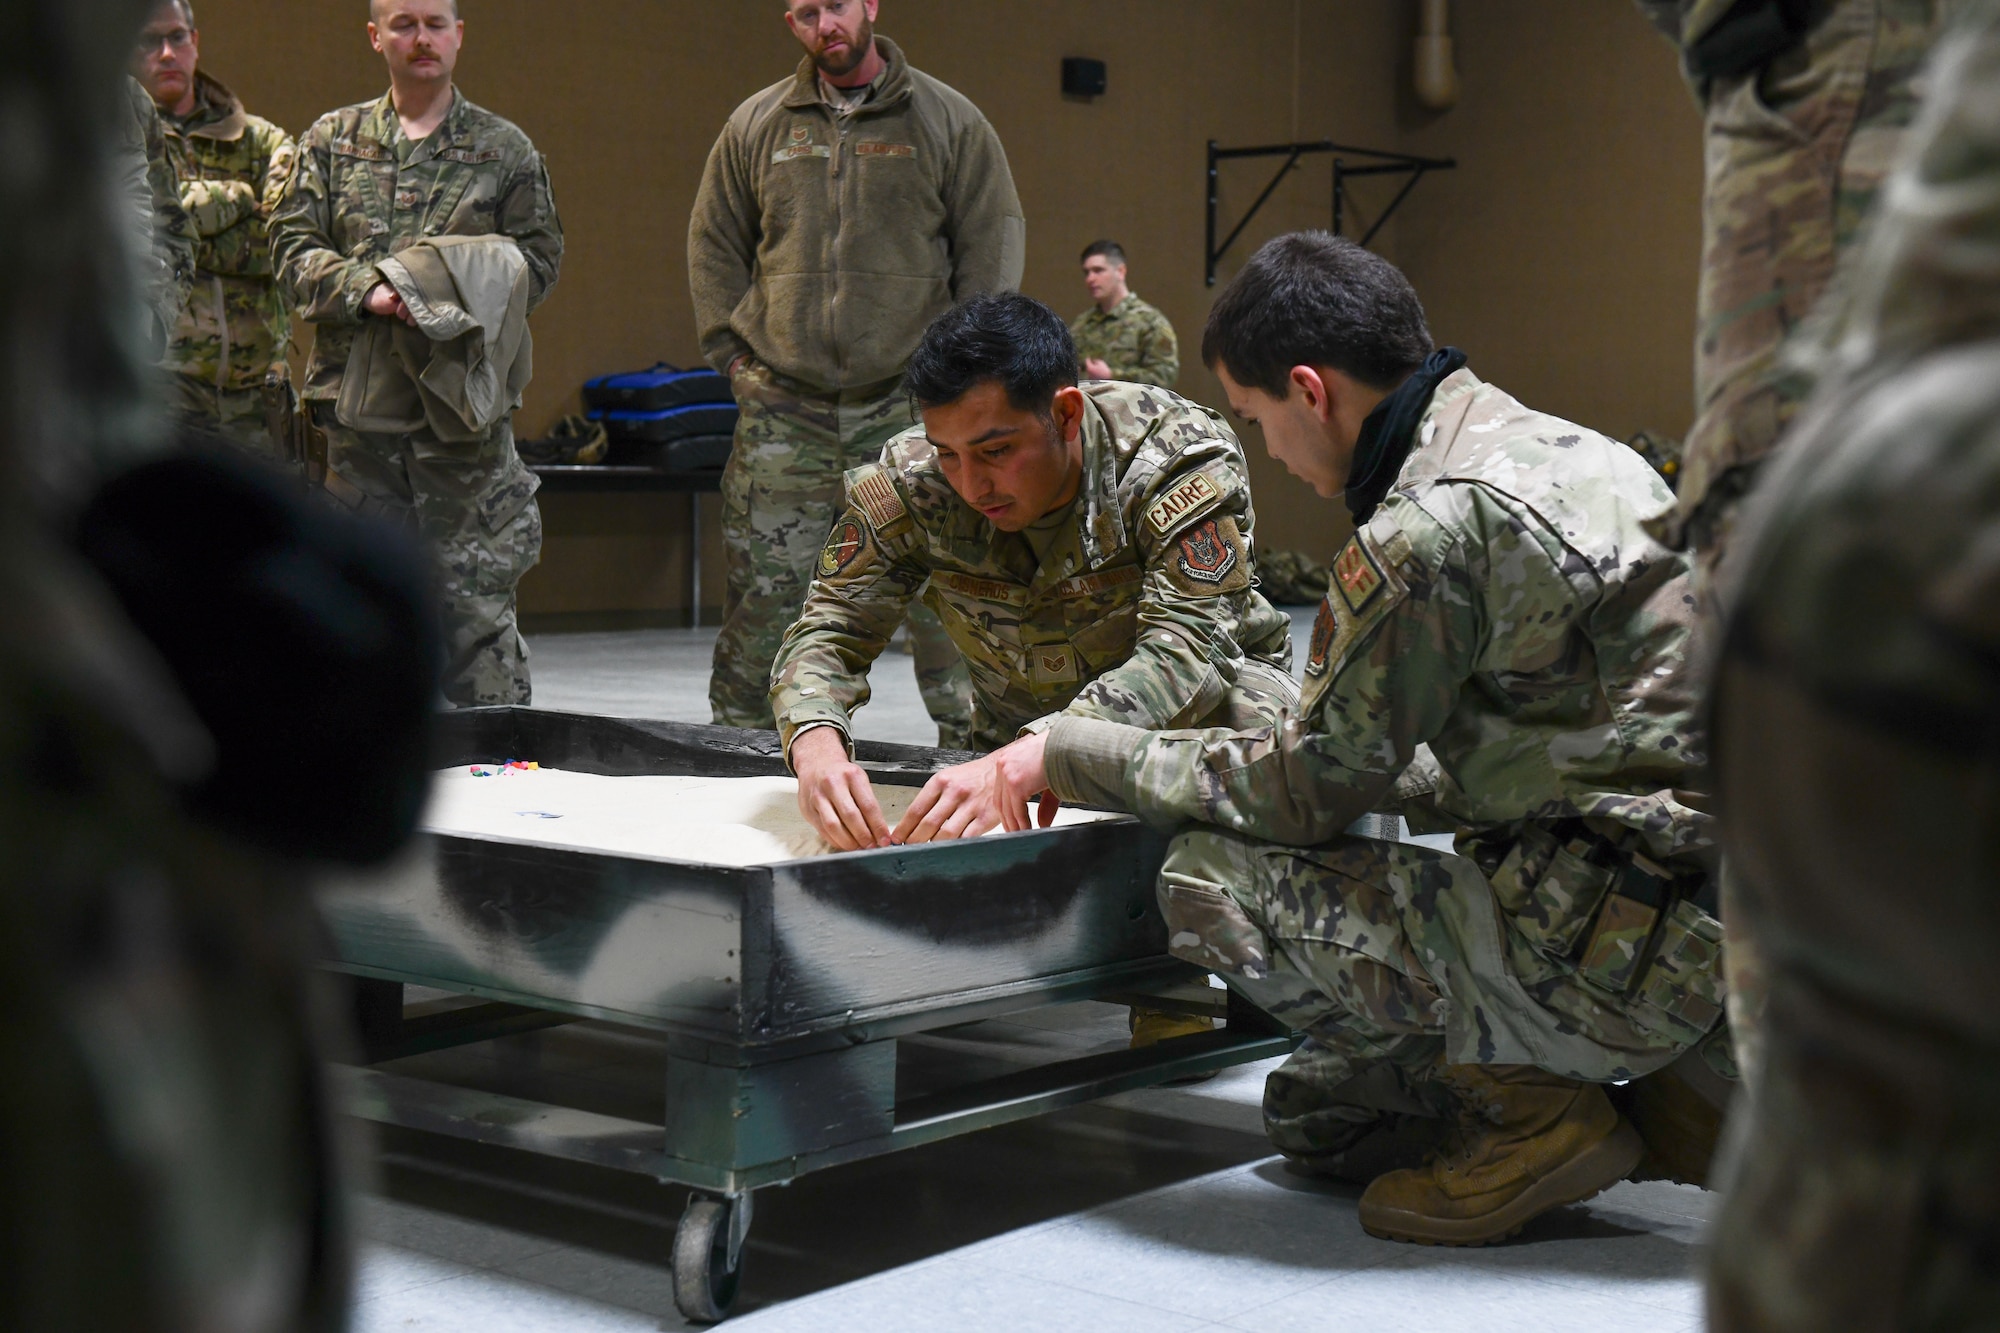 Staff Sgt. Ryan Cisneros, an Integrated Defense Leadership Course cadre member assigned to the 310th Security Forces Squadron, Schriever Space Force Base, Colorado, teaches a hands-on land navigation course on March 14, 2023, at Youngstown Air Reserve Station, Ohio.